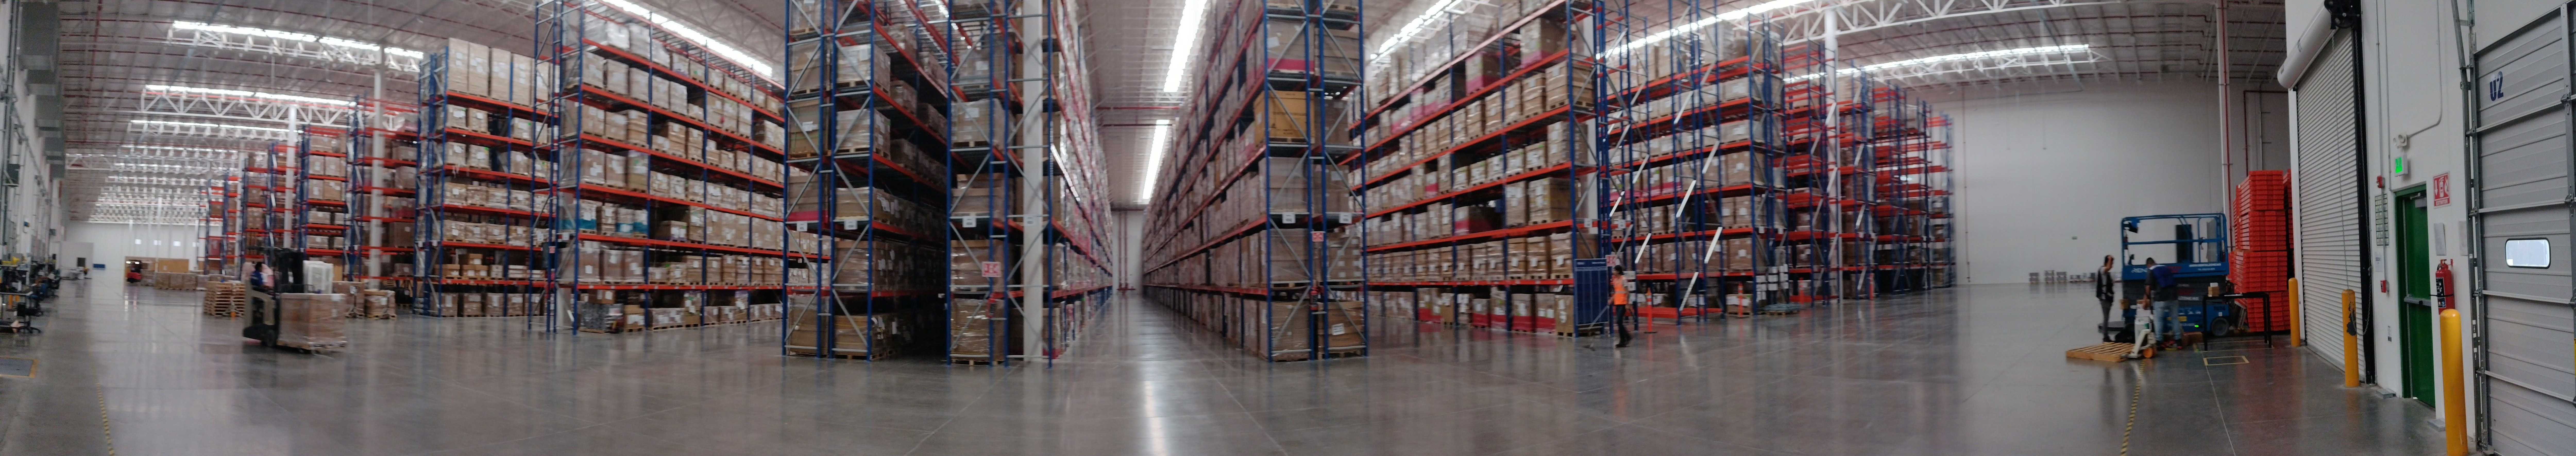 Lines of shelving stacked with boxed in a row within a DSV warehouse.